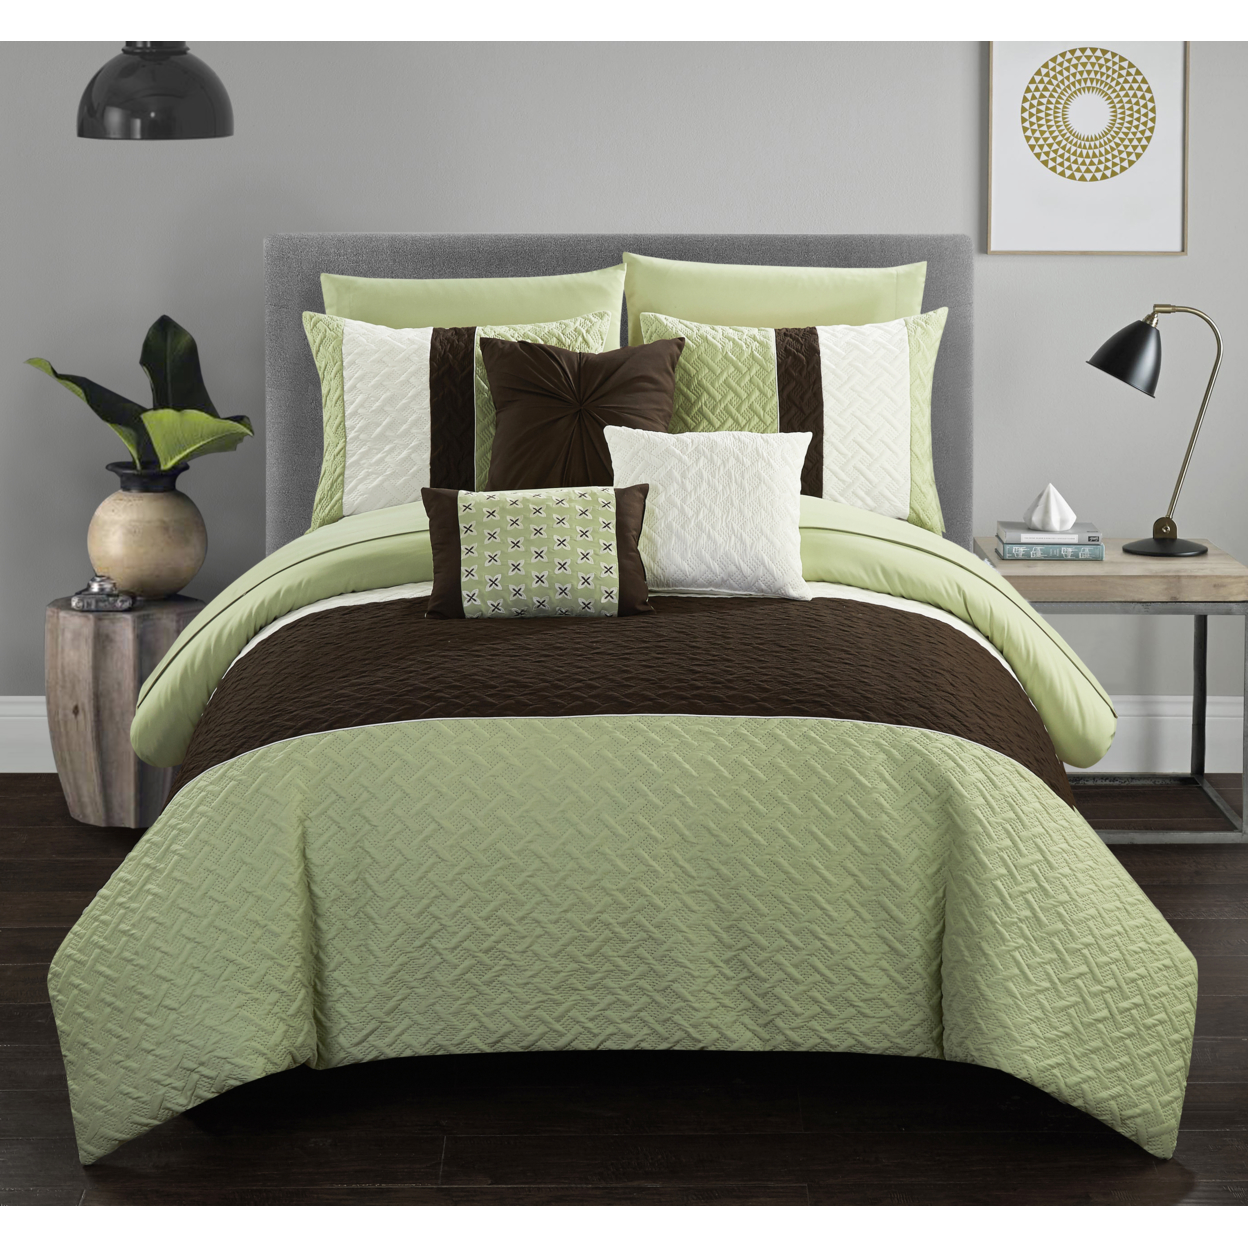 Chic Home Shaila 10 Or 8 Piece Comforter Set Color Block Quilted Embroidered Design Bed In A Bag Bedding - Green, King